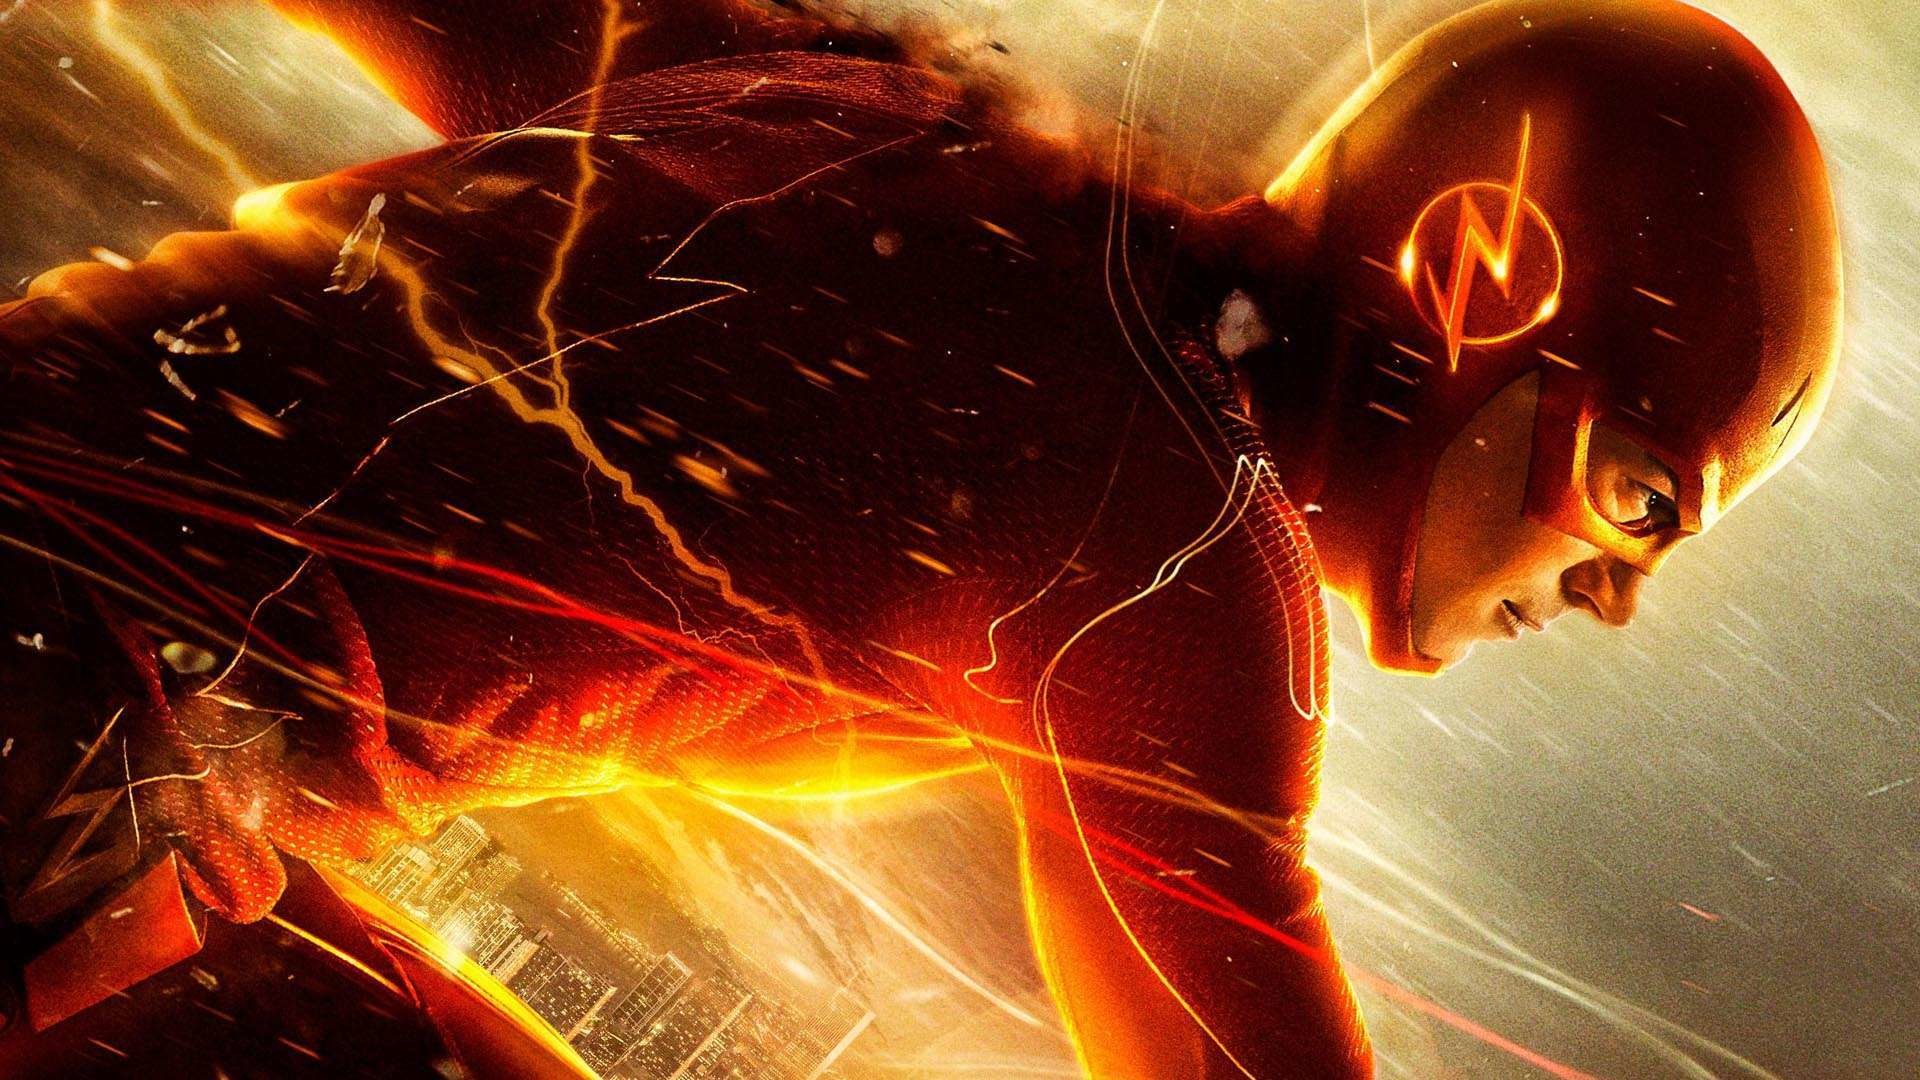 On September 7, 2015 By admin Comments Off on The Flash HD